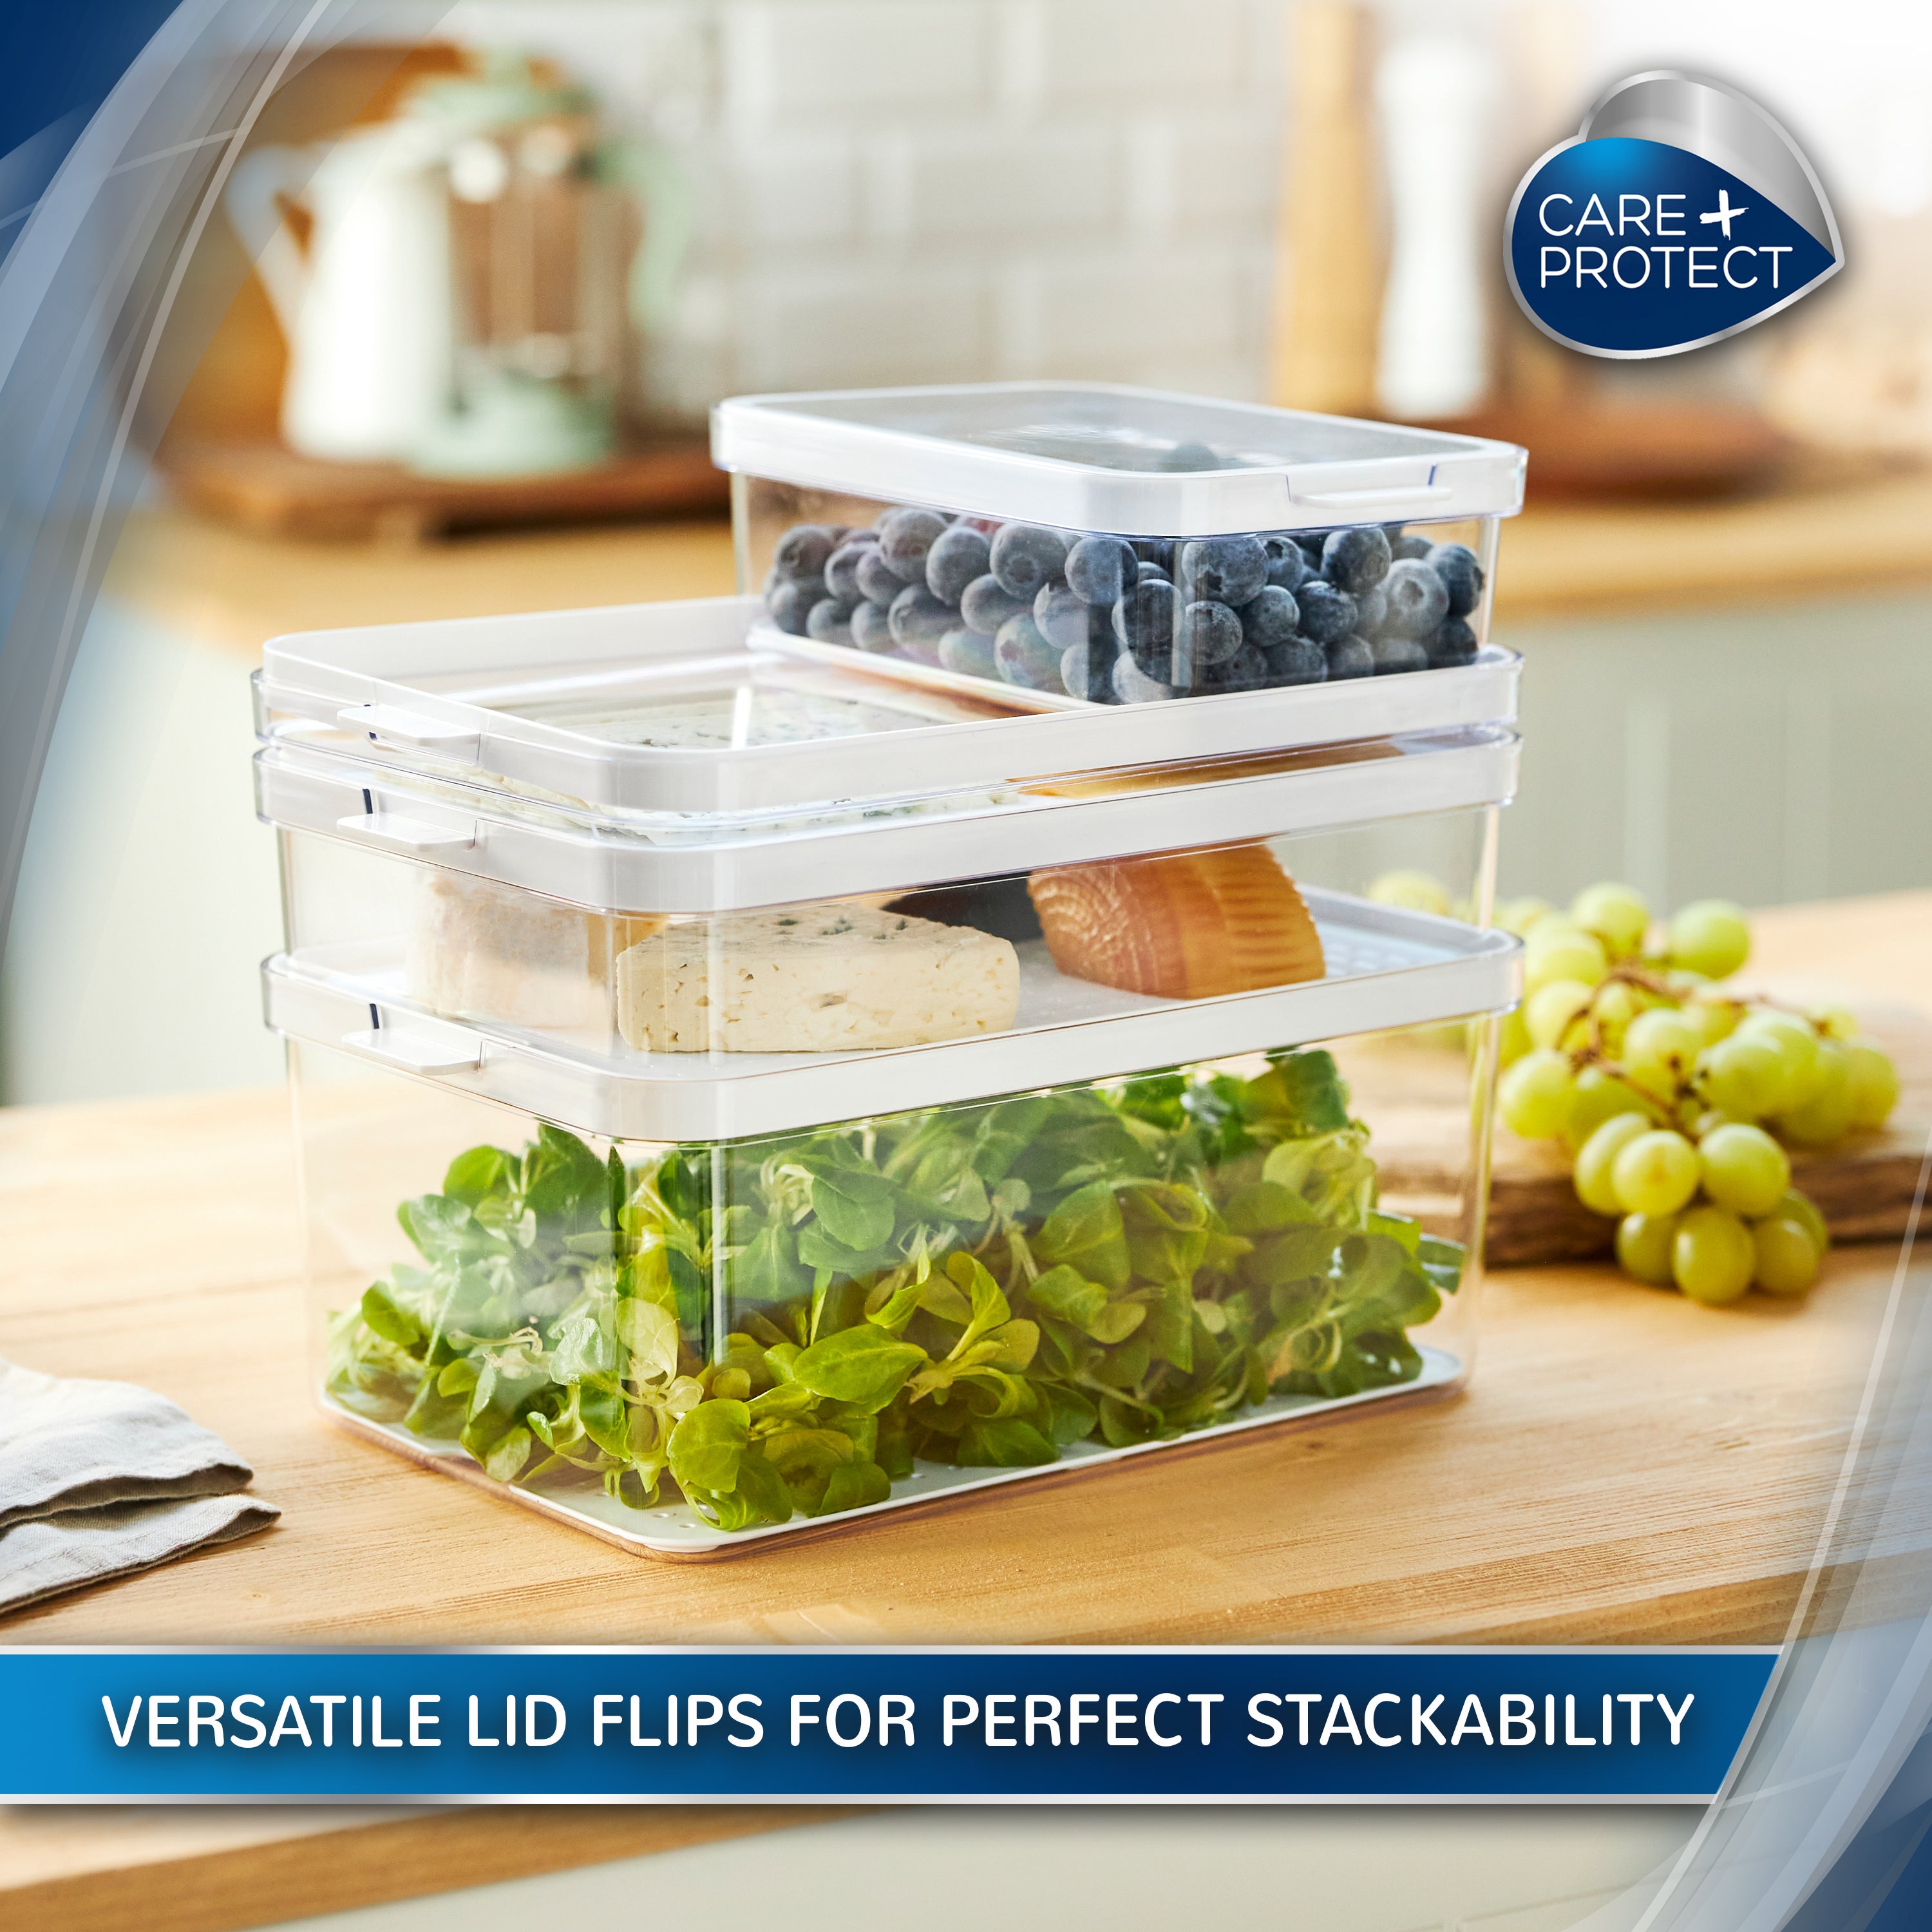 Care + Protect Food Container, 2.6L